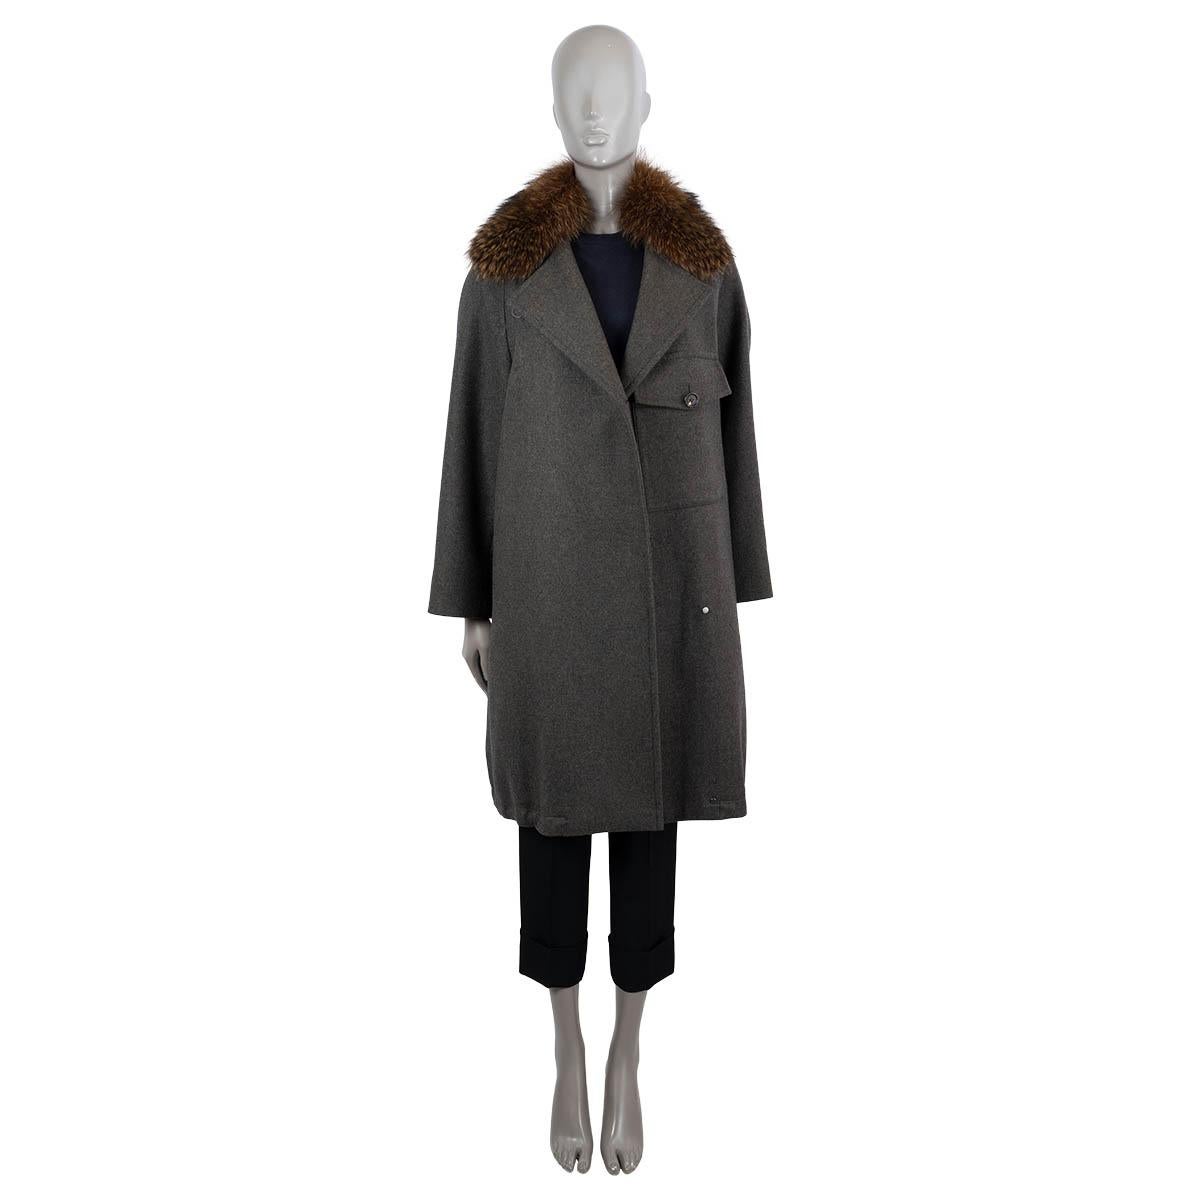 100% authentic Brunello Cucinelli asymmetric oversized fur trim coat in dark grey, brown and olive green cashmere (100%). The design features a detachable fur trim collar, a flap pocket on the chest and drawstring on the bottom hem. Closes with one